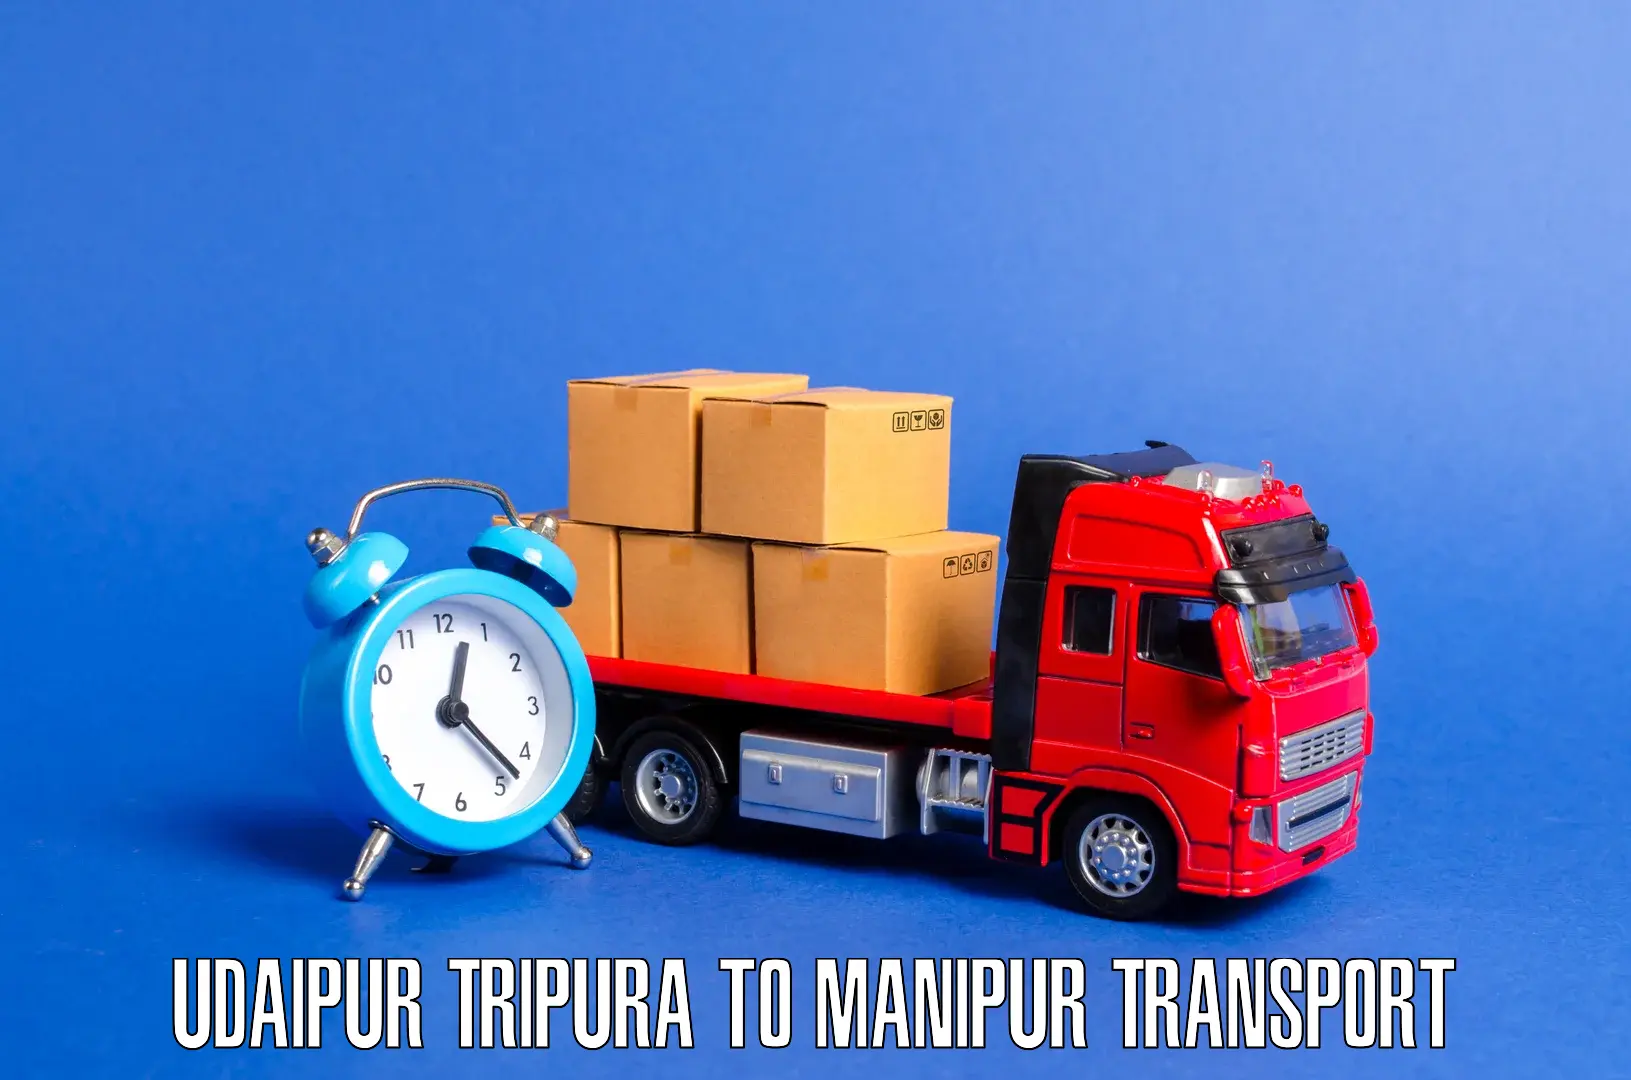 Transport bike from one state to another in Udaipur Tripura to Churachandpur